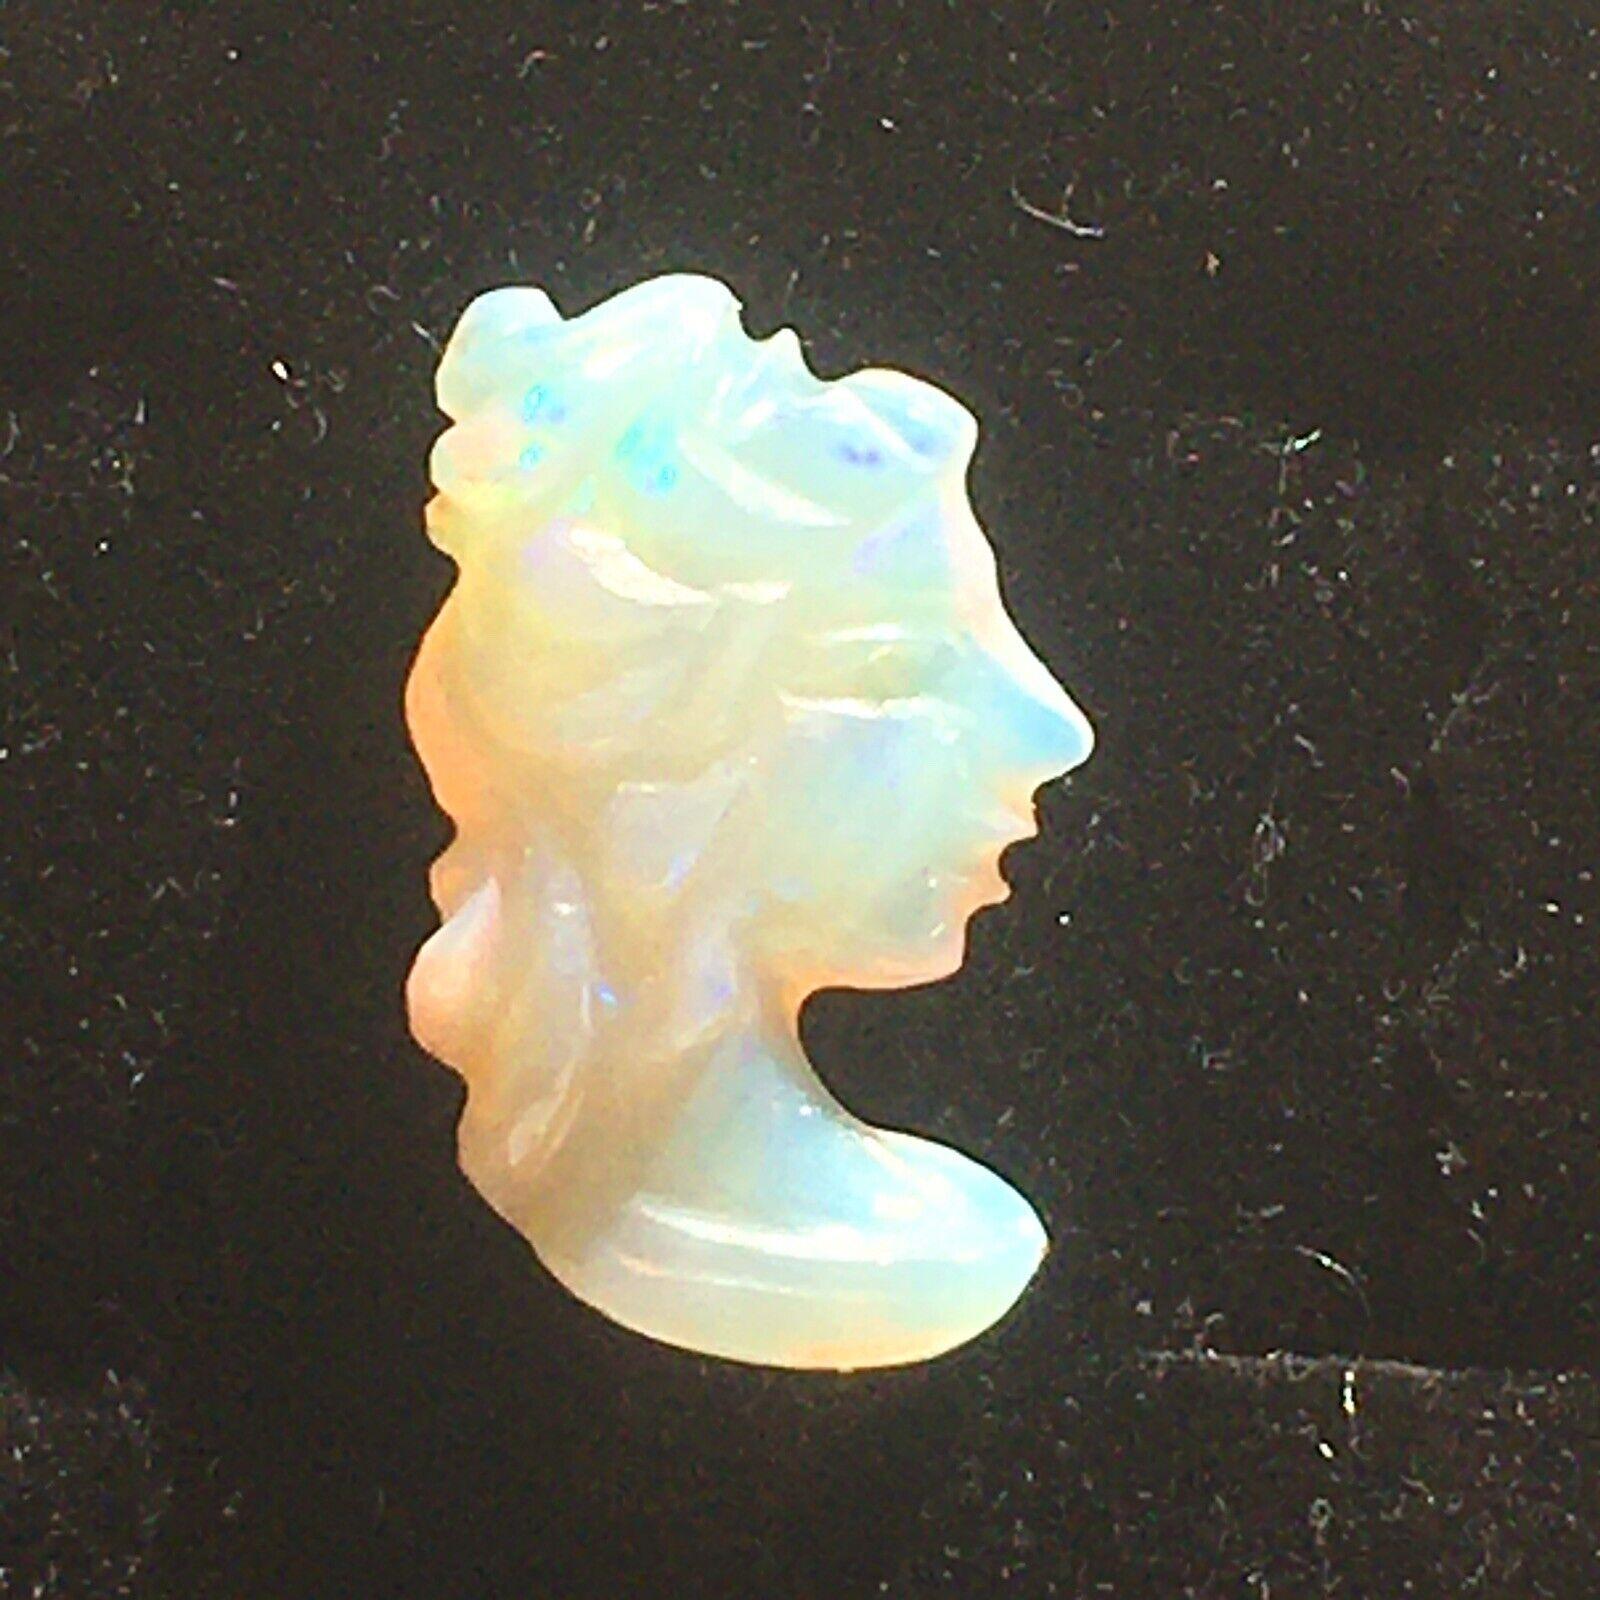 Australian Lightning Ridge Opal Detailed Carving of Lady's Bust
Length: 20mm
Thickness: 5mm
Weight: 1.3 gram
Condition: Australian Opal, possibly Lightning Ridge, carving of a Lady's bust in excellent condition, no damage, no abrasion